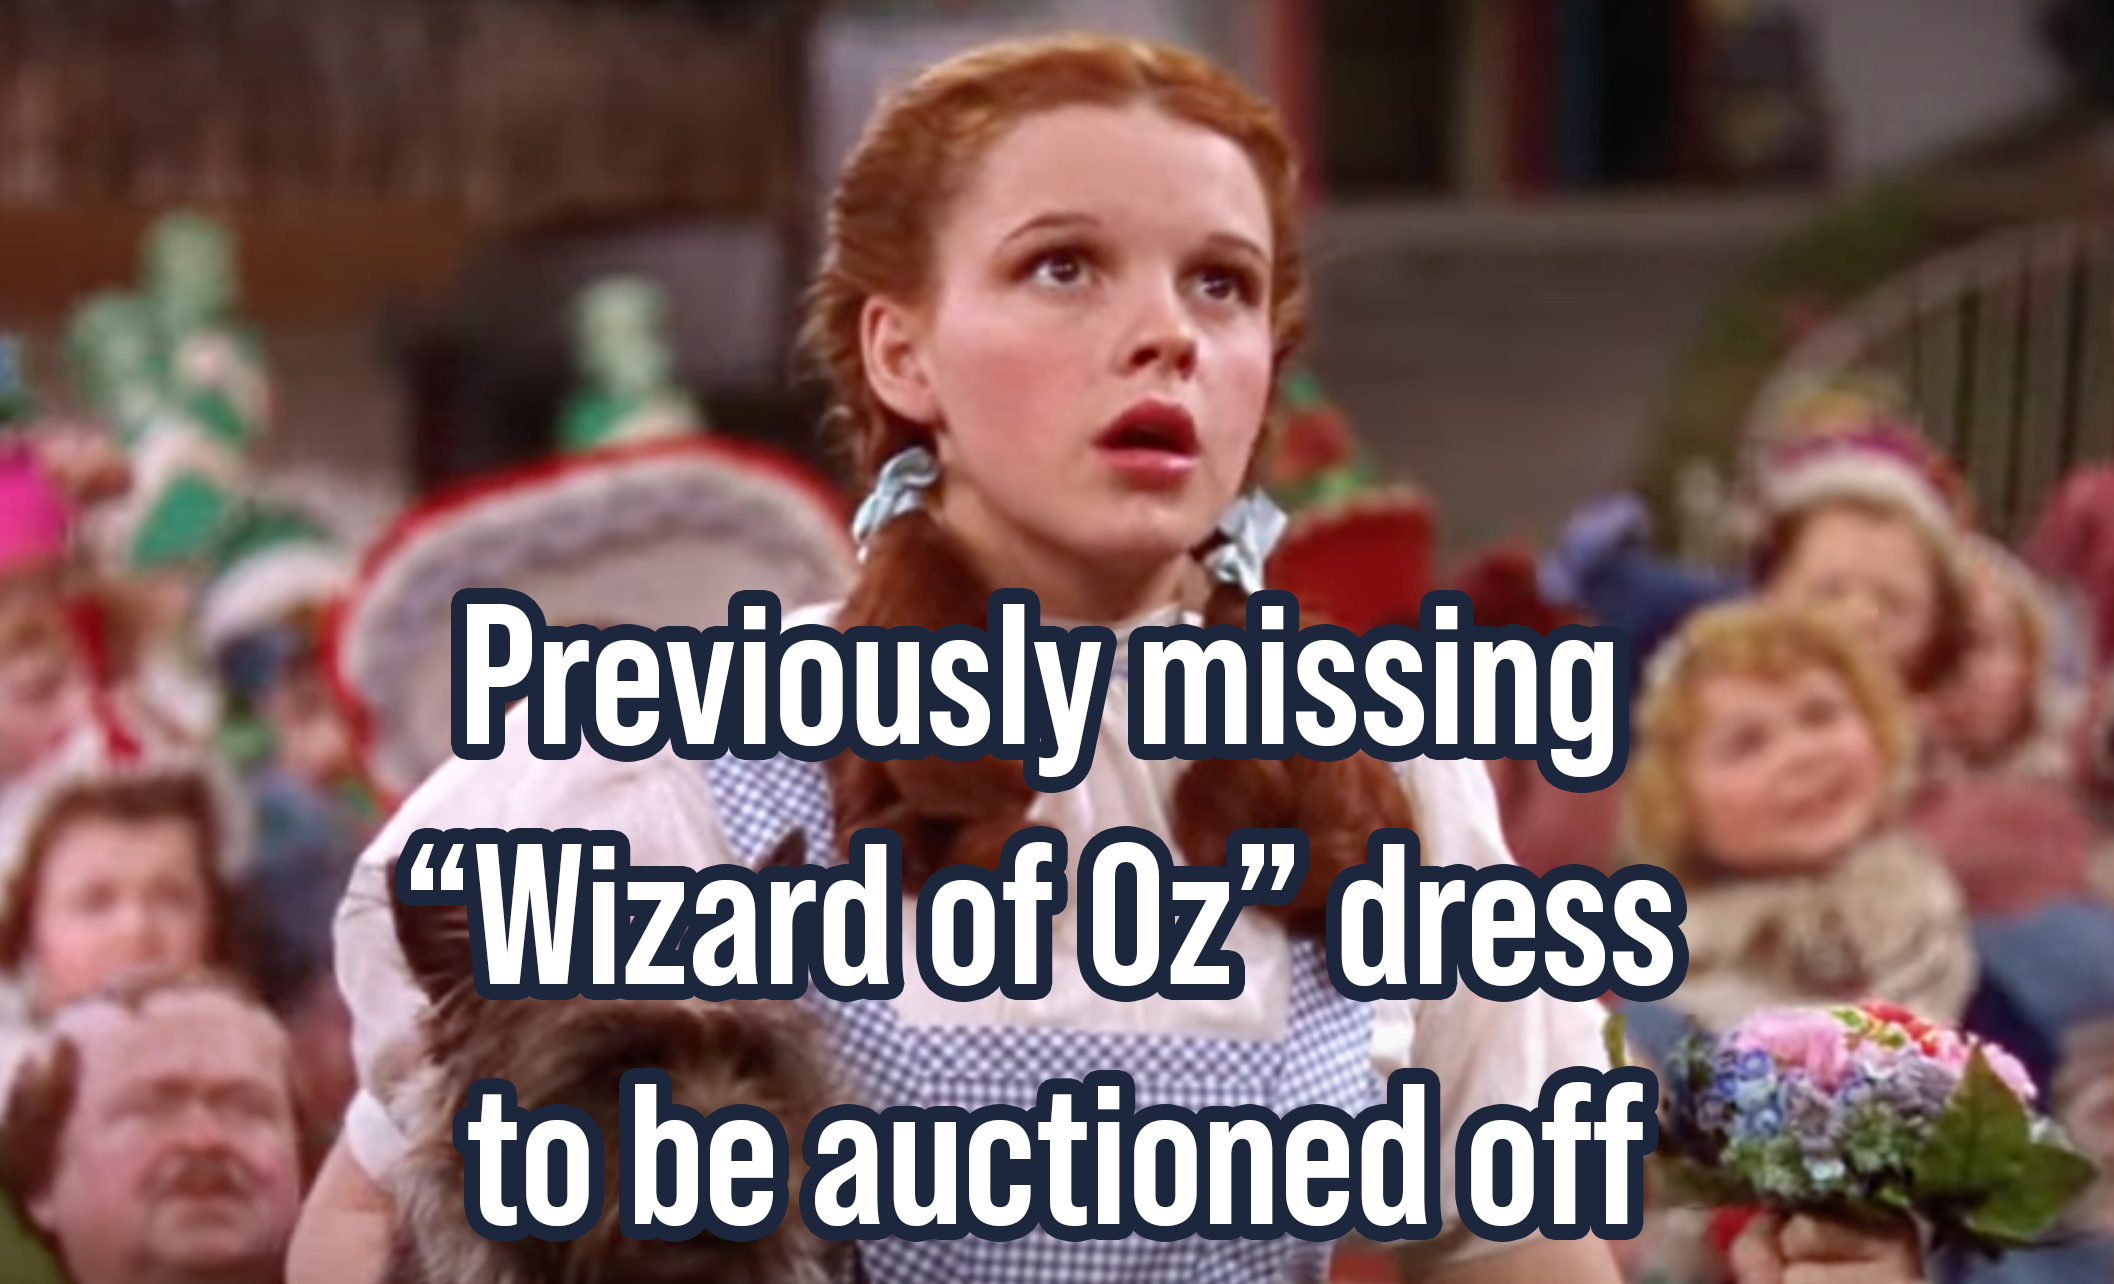 Judy Garland’s previously missing Wizard of Oz dress to be auctioned off